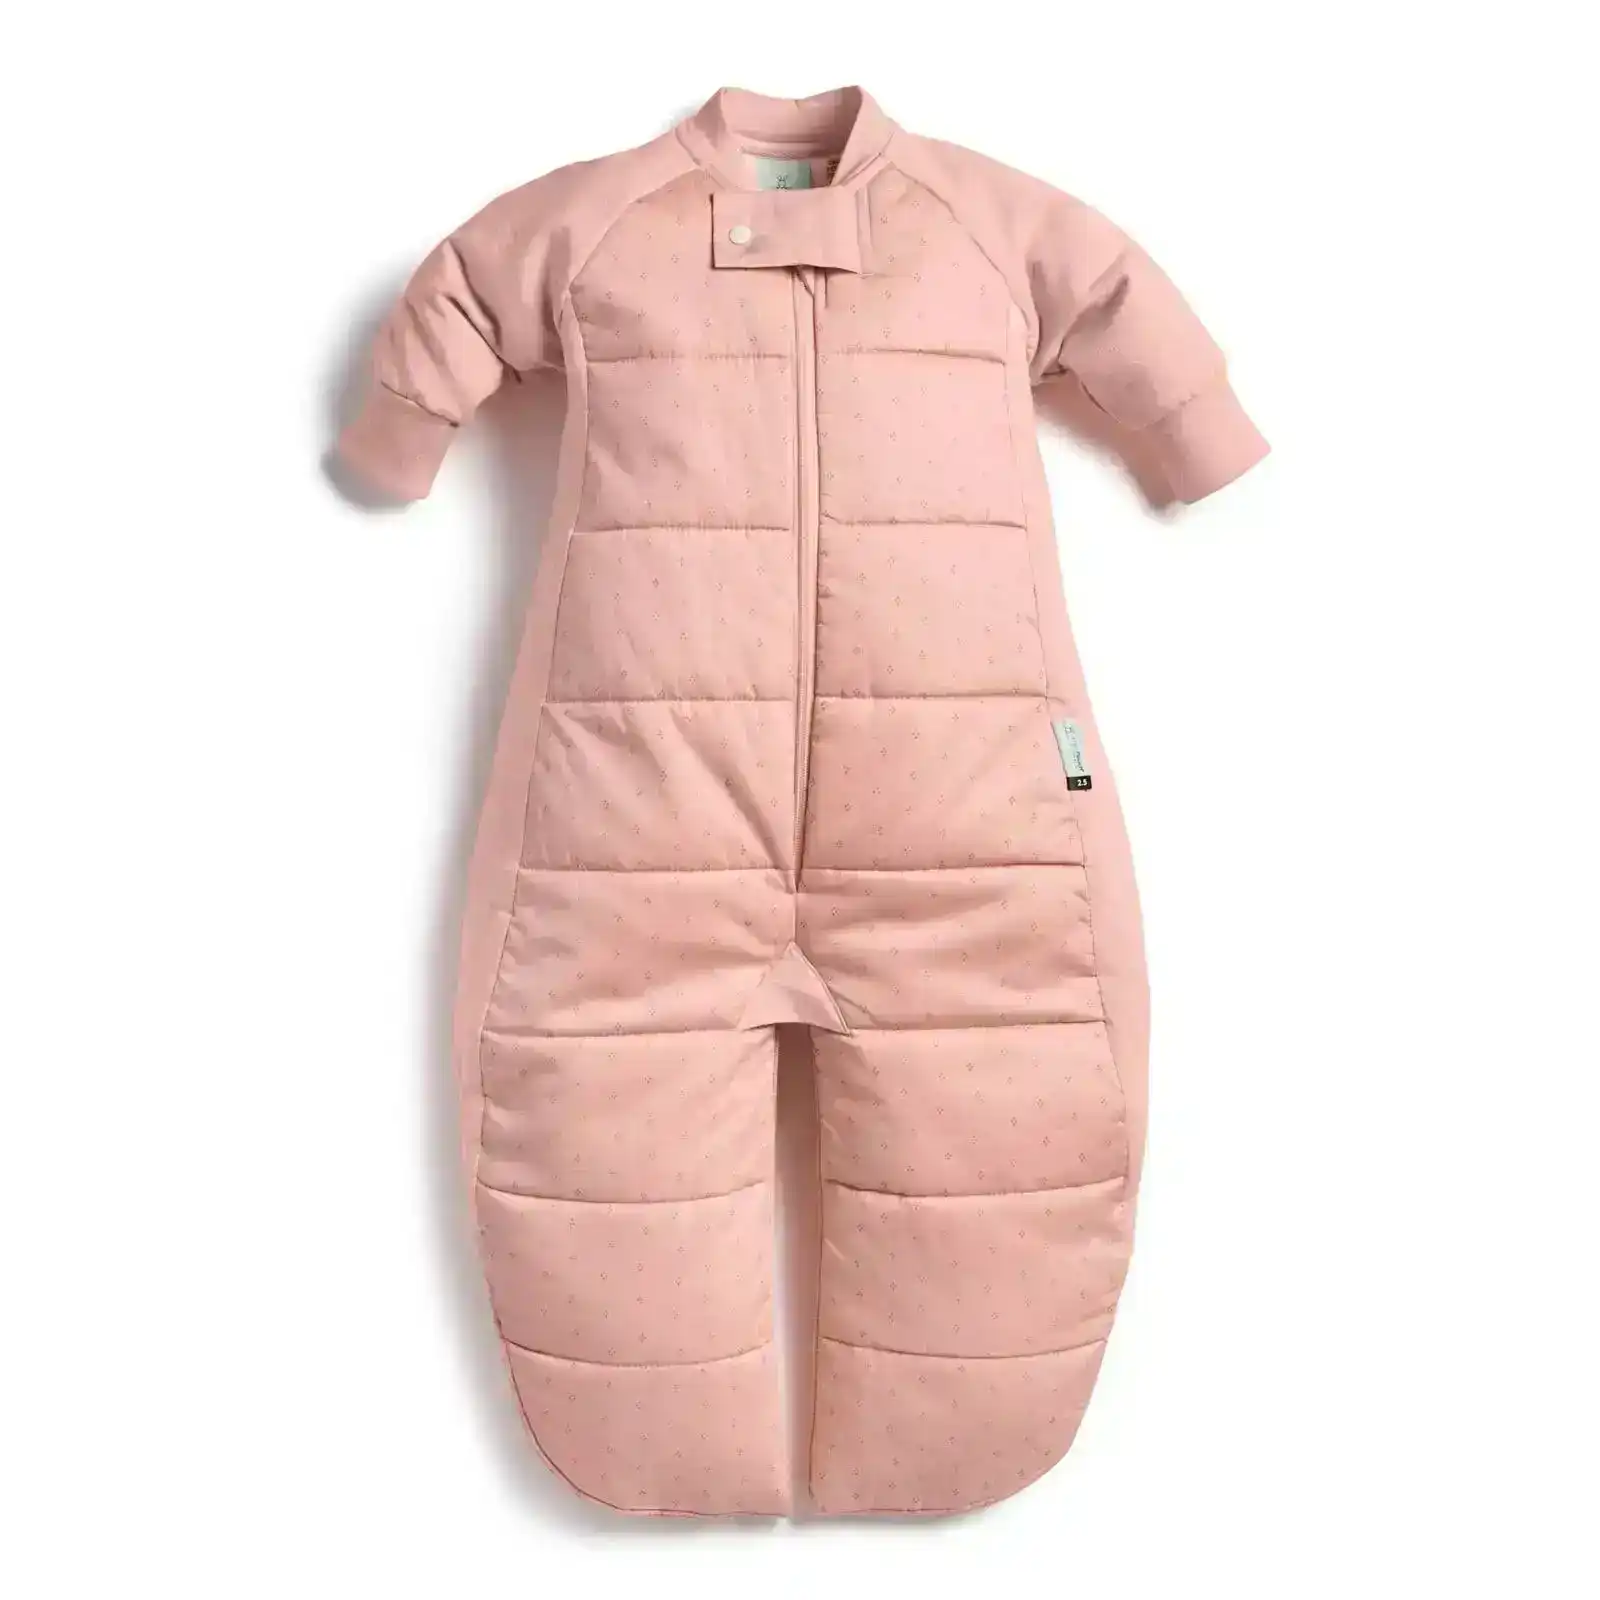 ergoPouch Organic/Cotton 2.5 TOG Sleep Suit Bag 8-24m for Baby/Toddler Berries